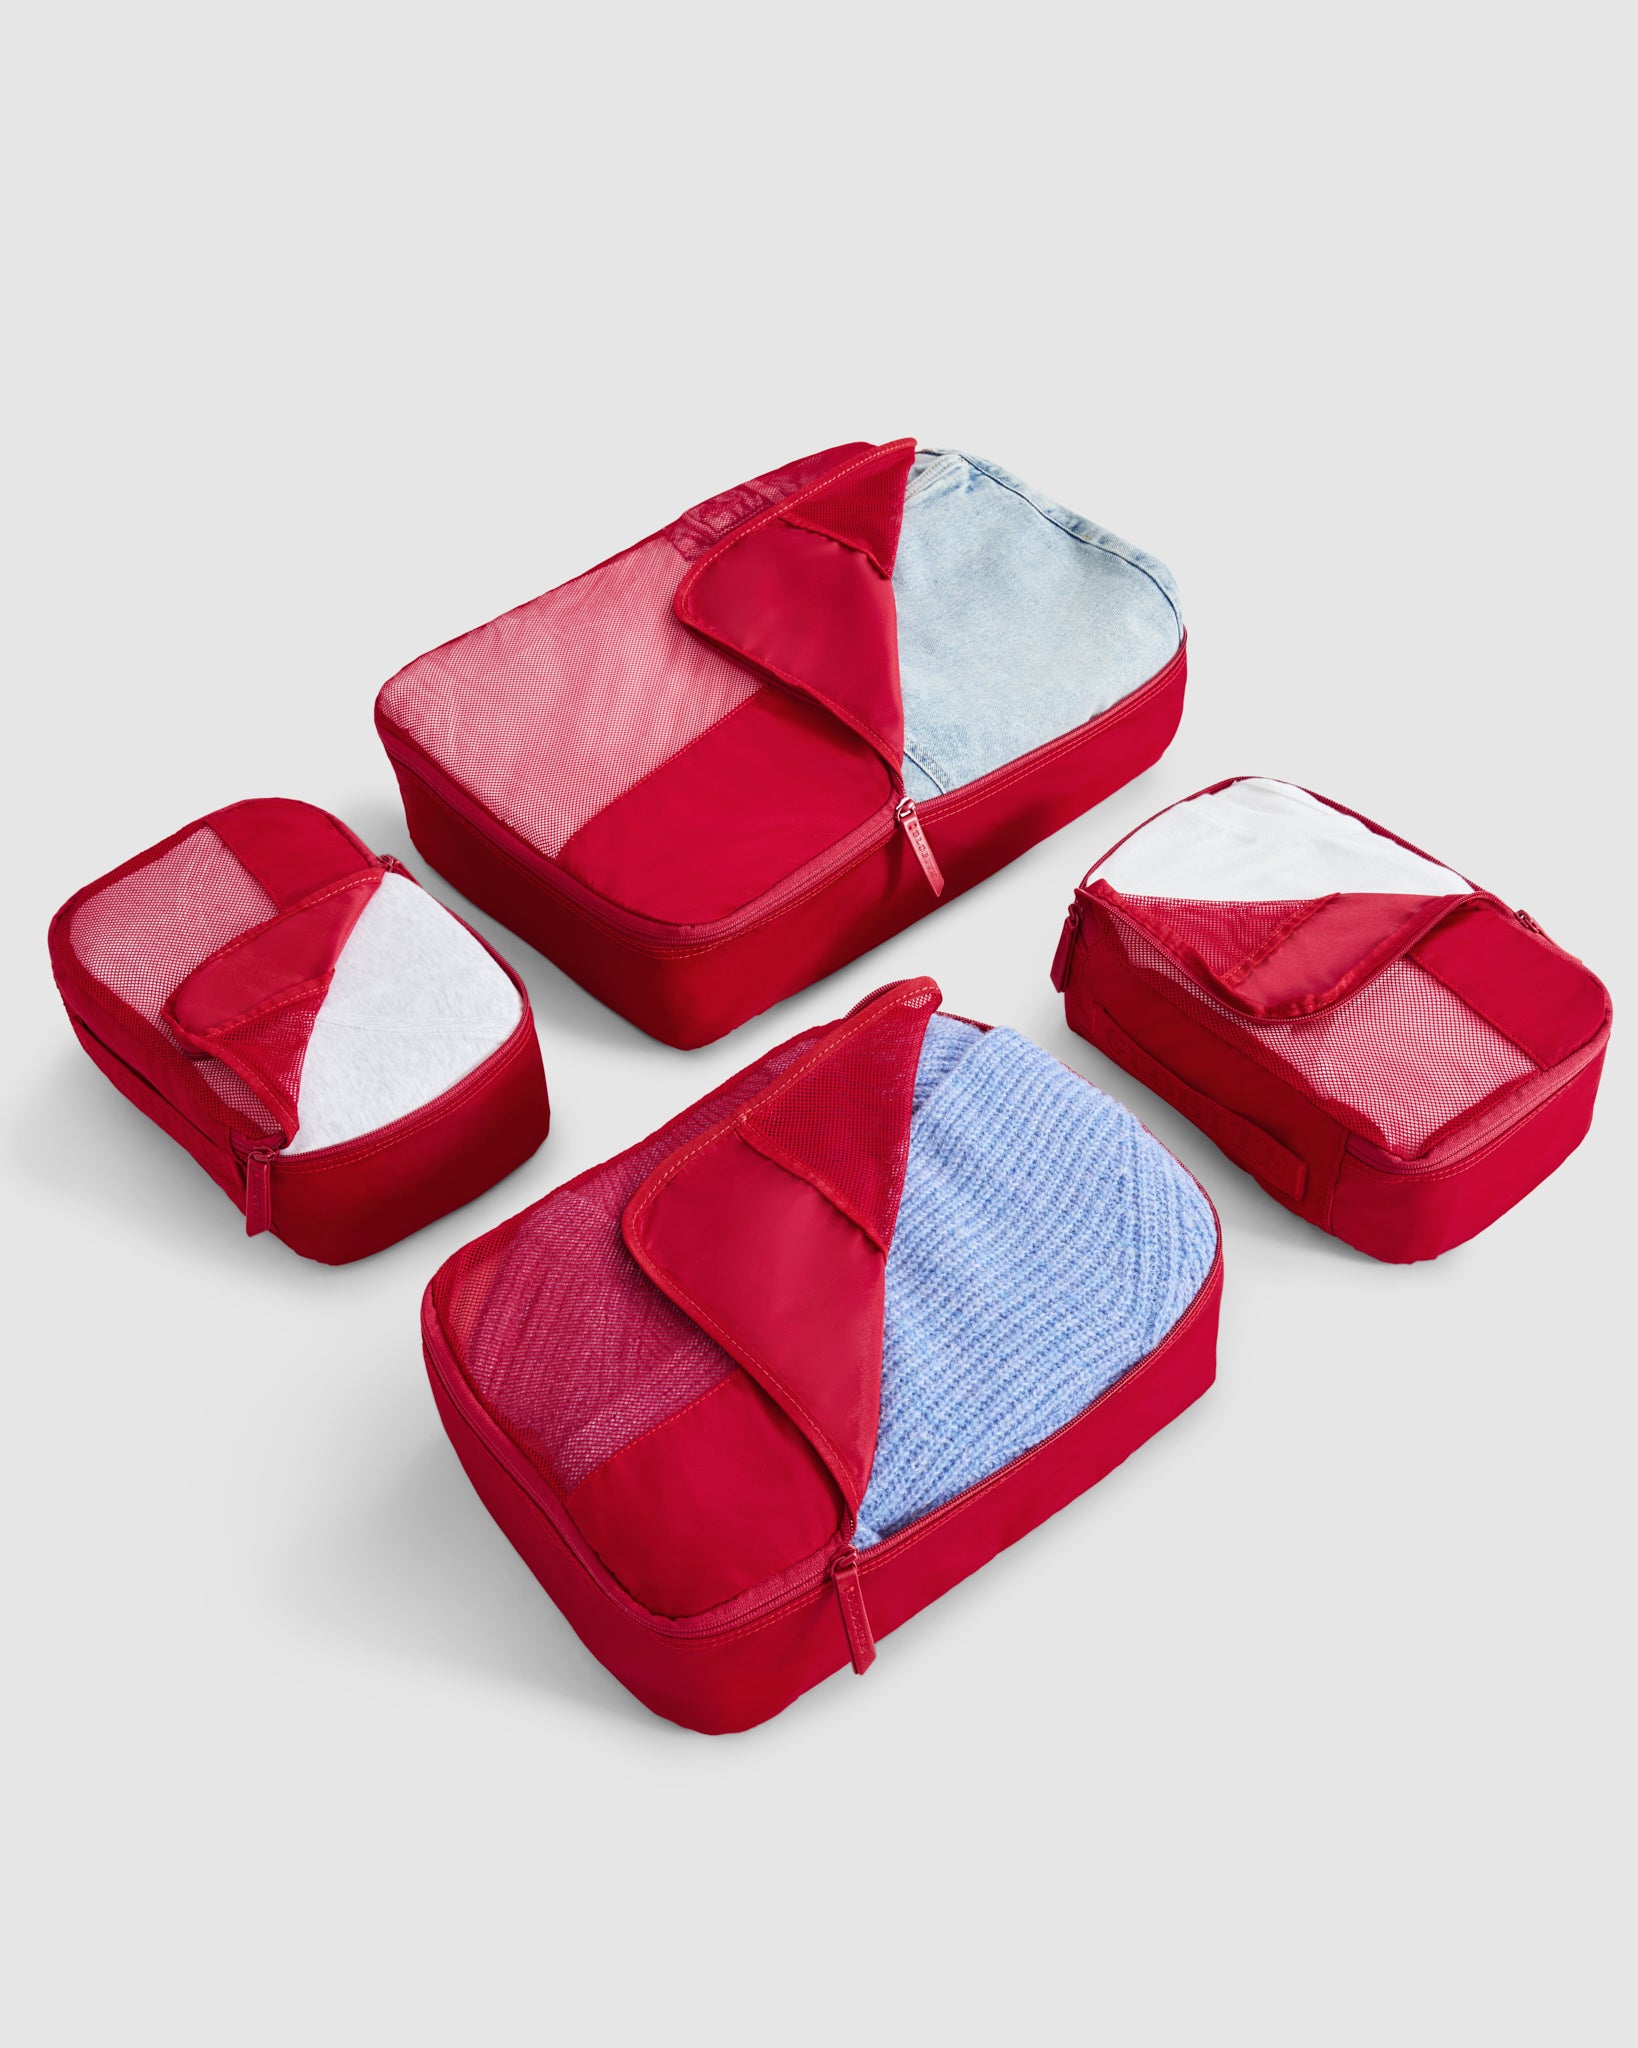 Lava Red 4 Piece Packing Cube